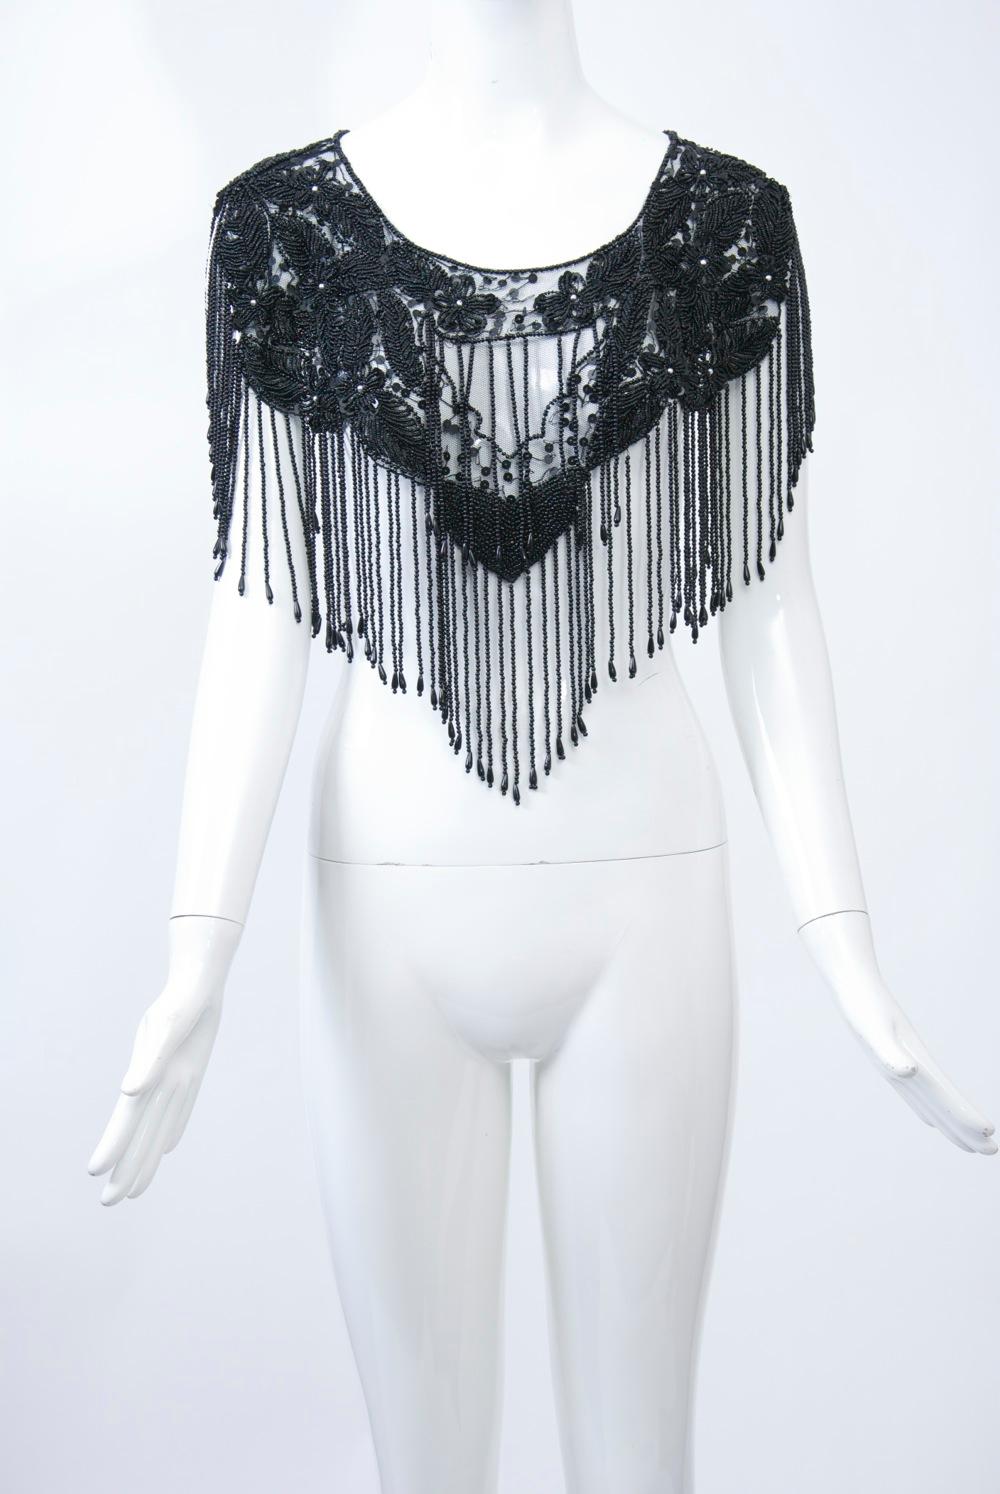 Black capelet of floral pattern beading on a net ground featuring a long beaded fringe coming to a point front and back. Slips easily over the head. Perfect dressy cover-up for long spaghetti-strap dress or camisole. Provenance: singer Edie Gorme.